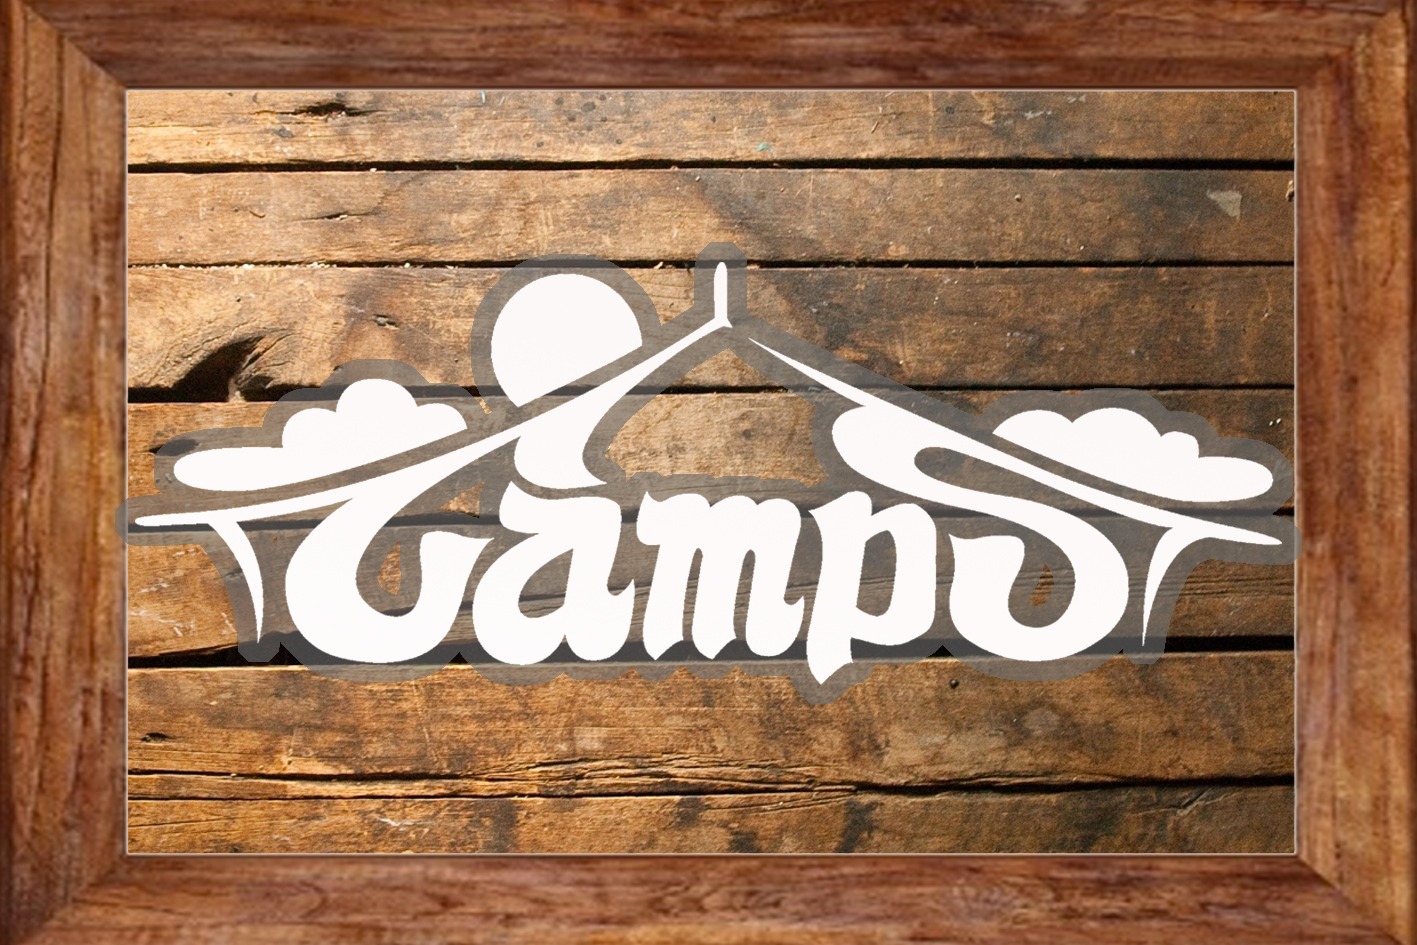 Campsstyle